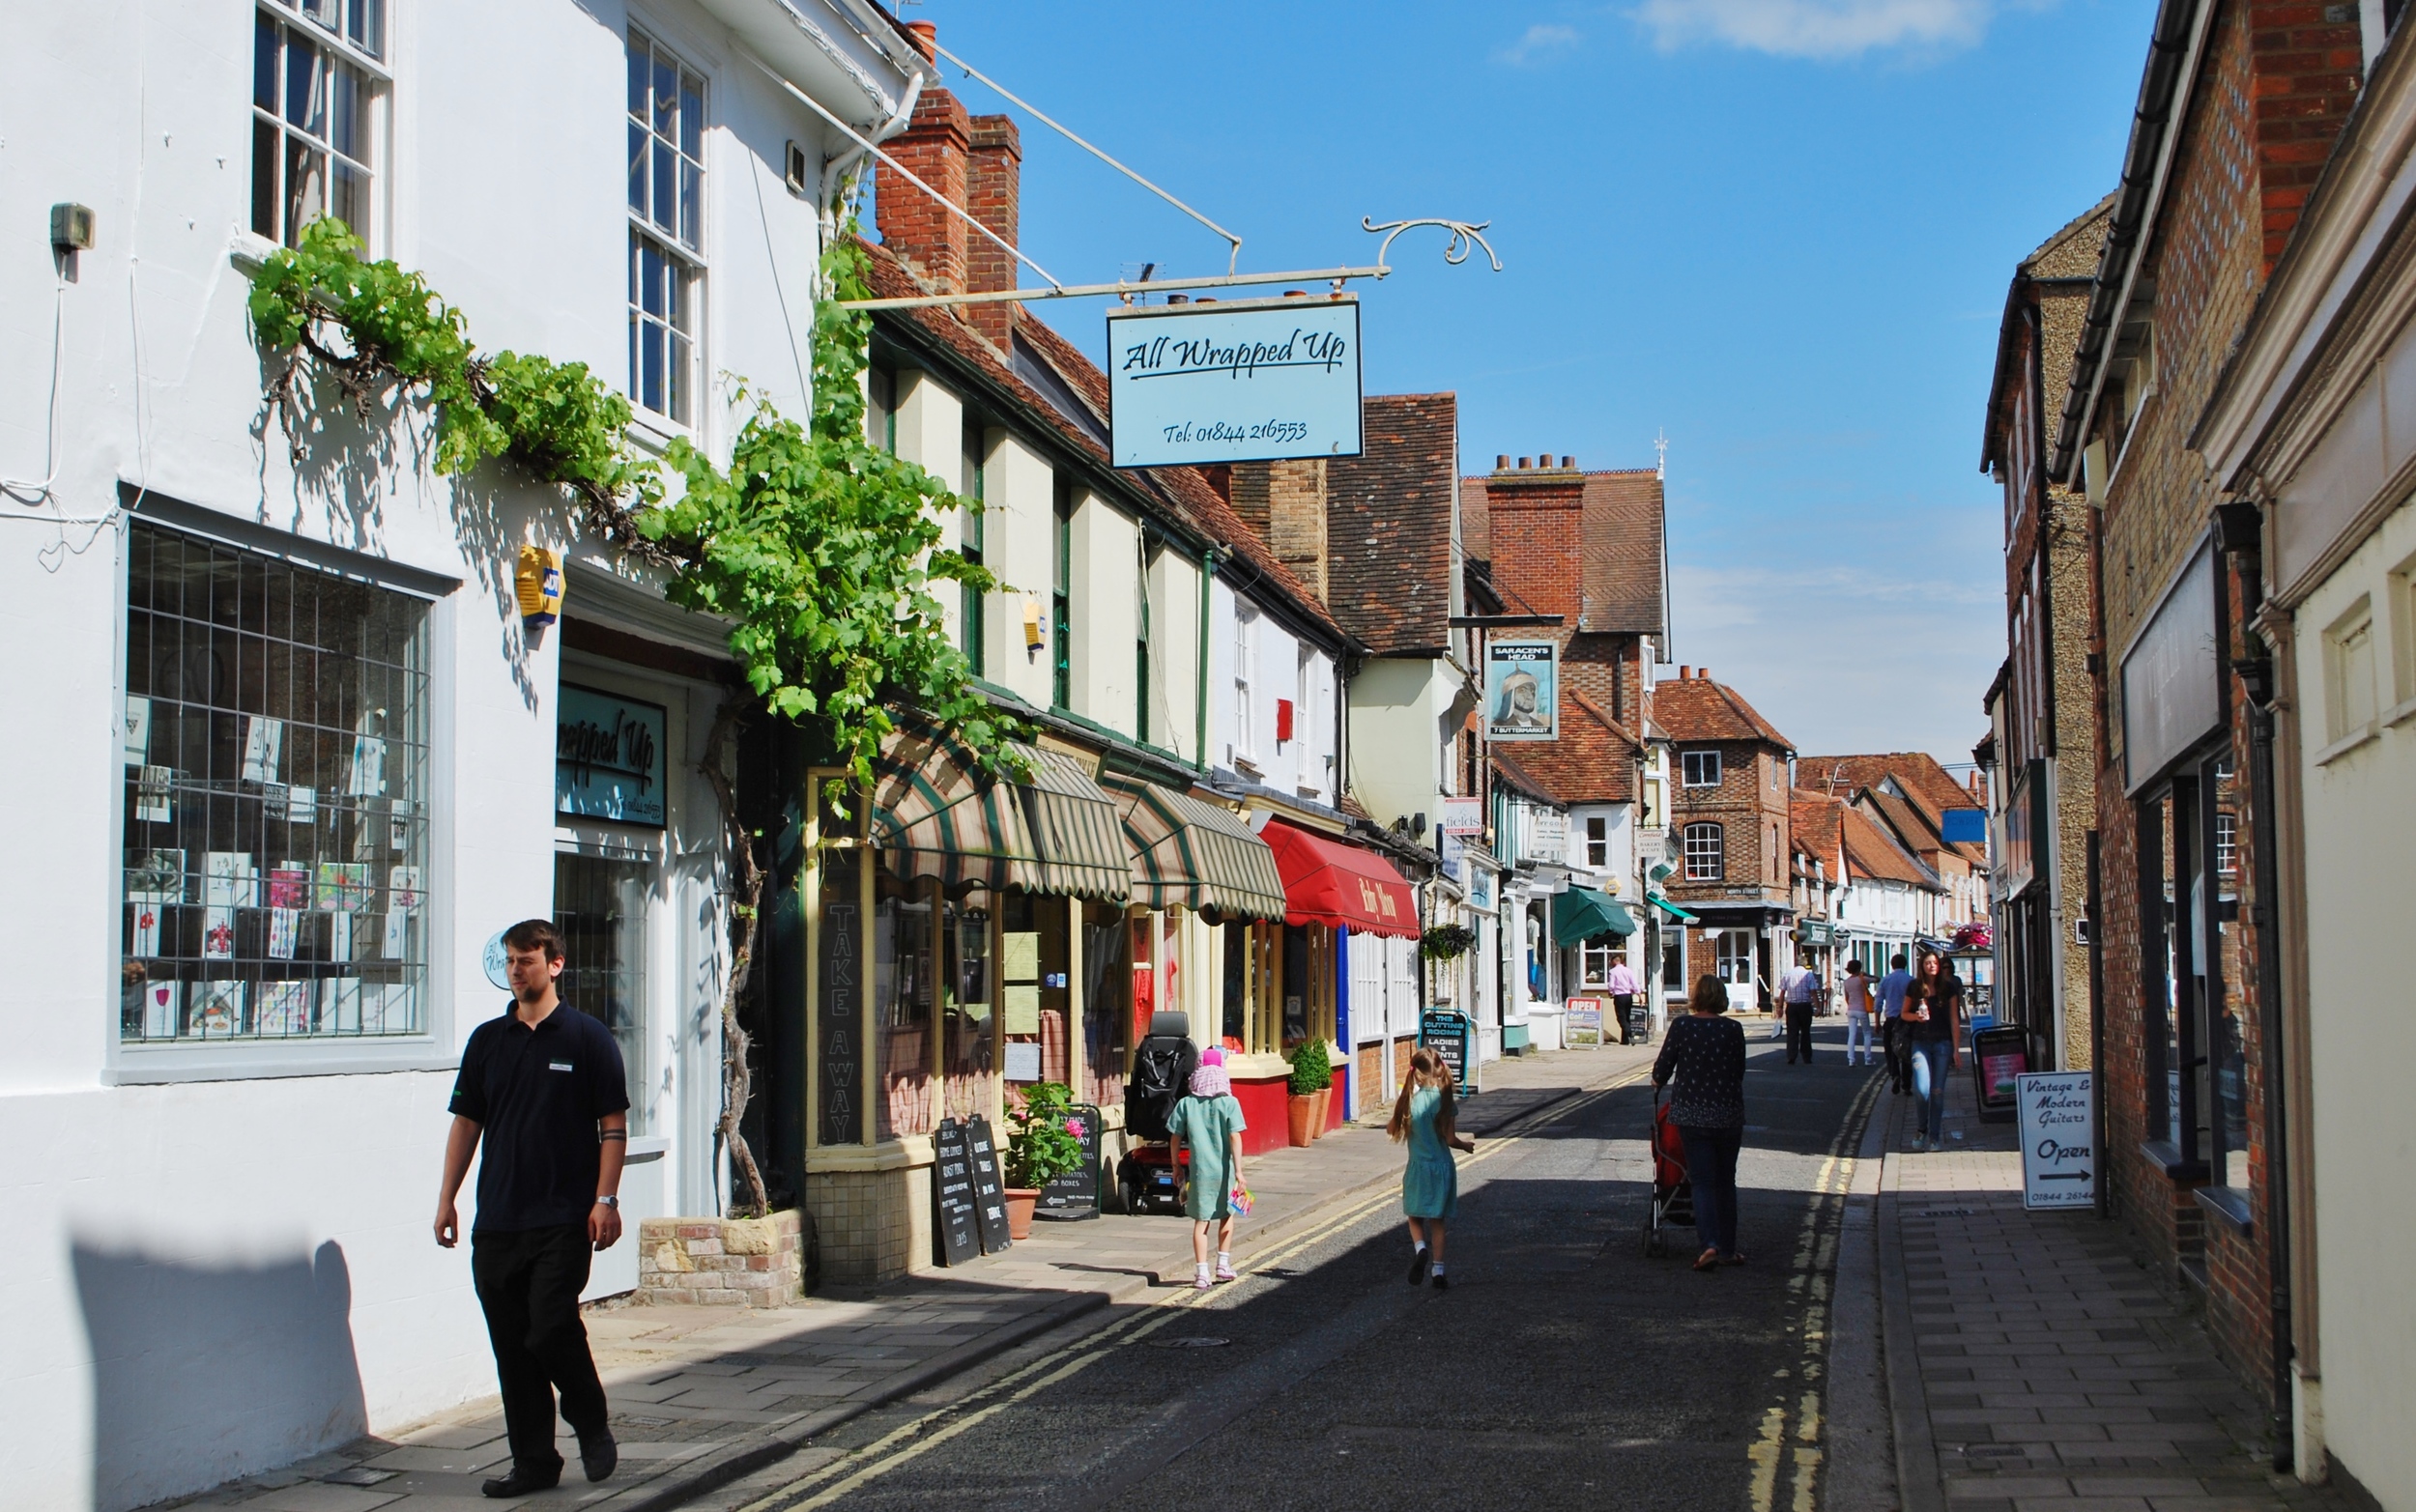 The market town of Thame